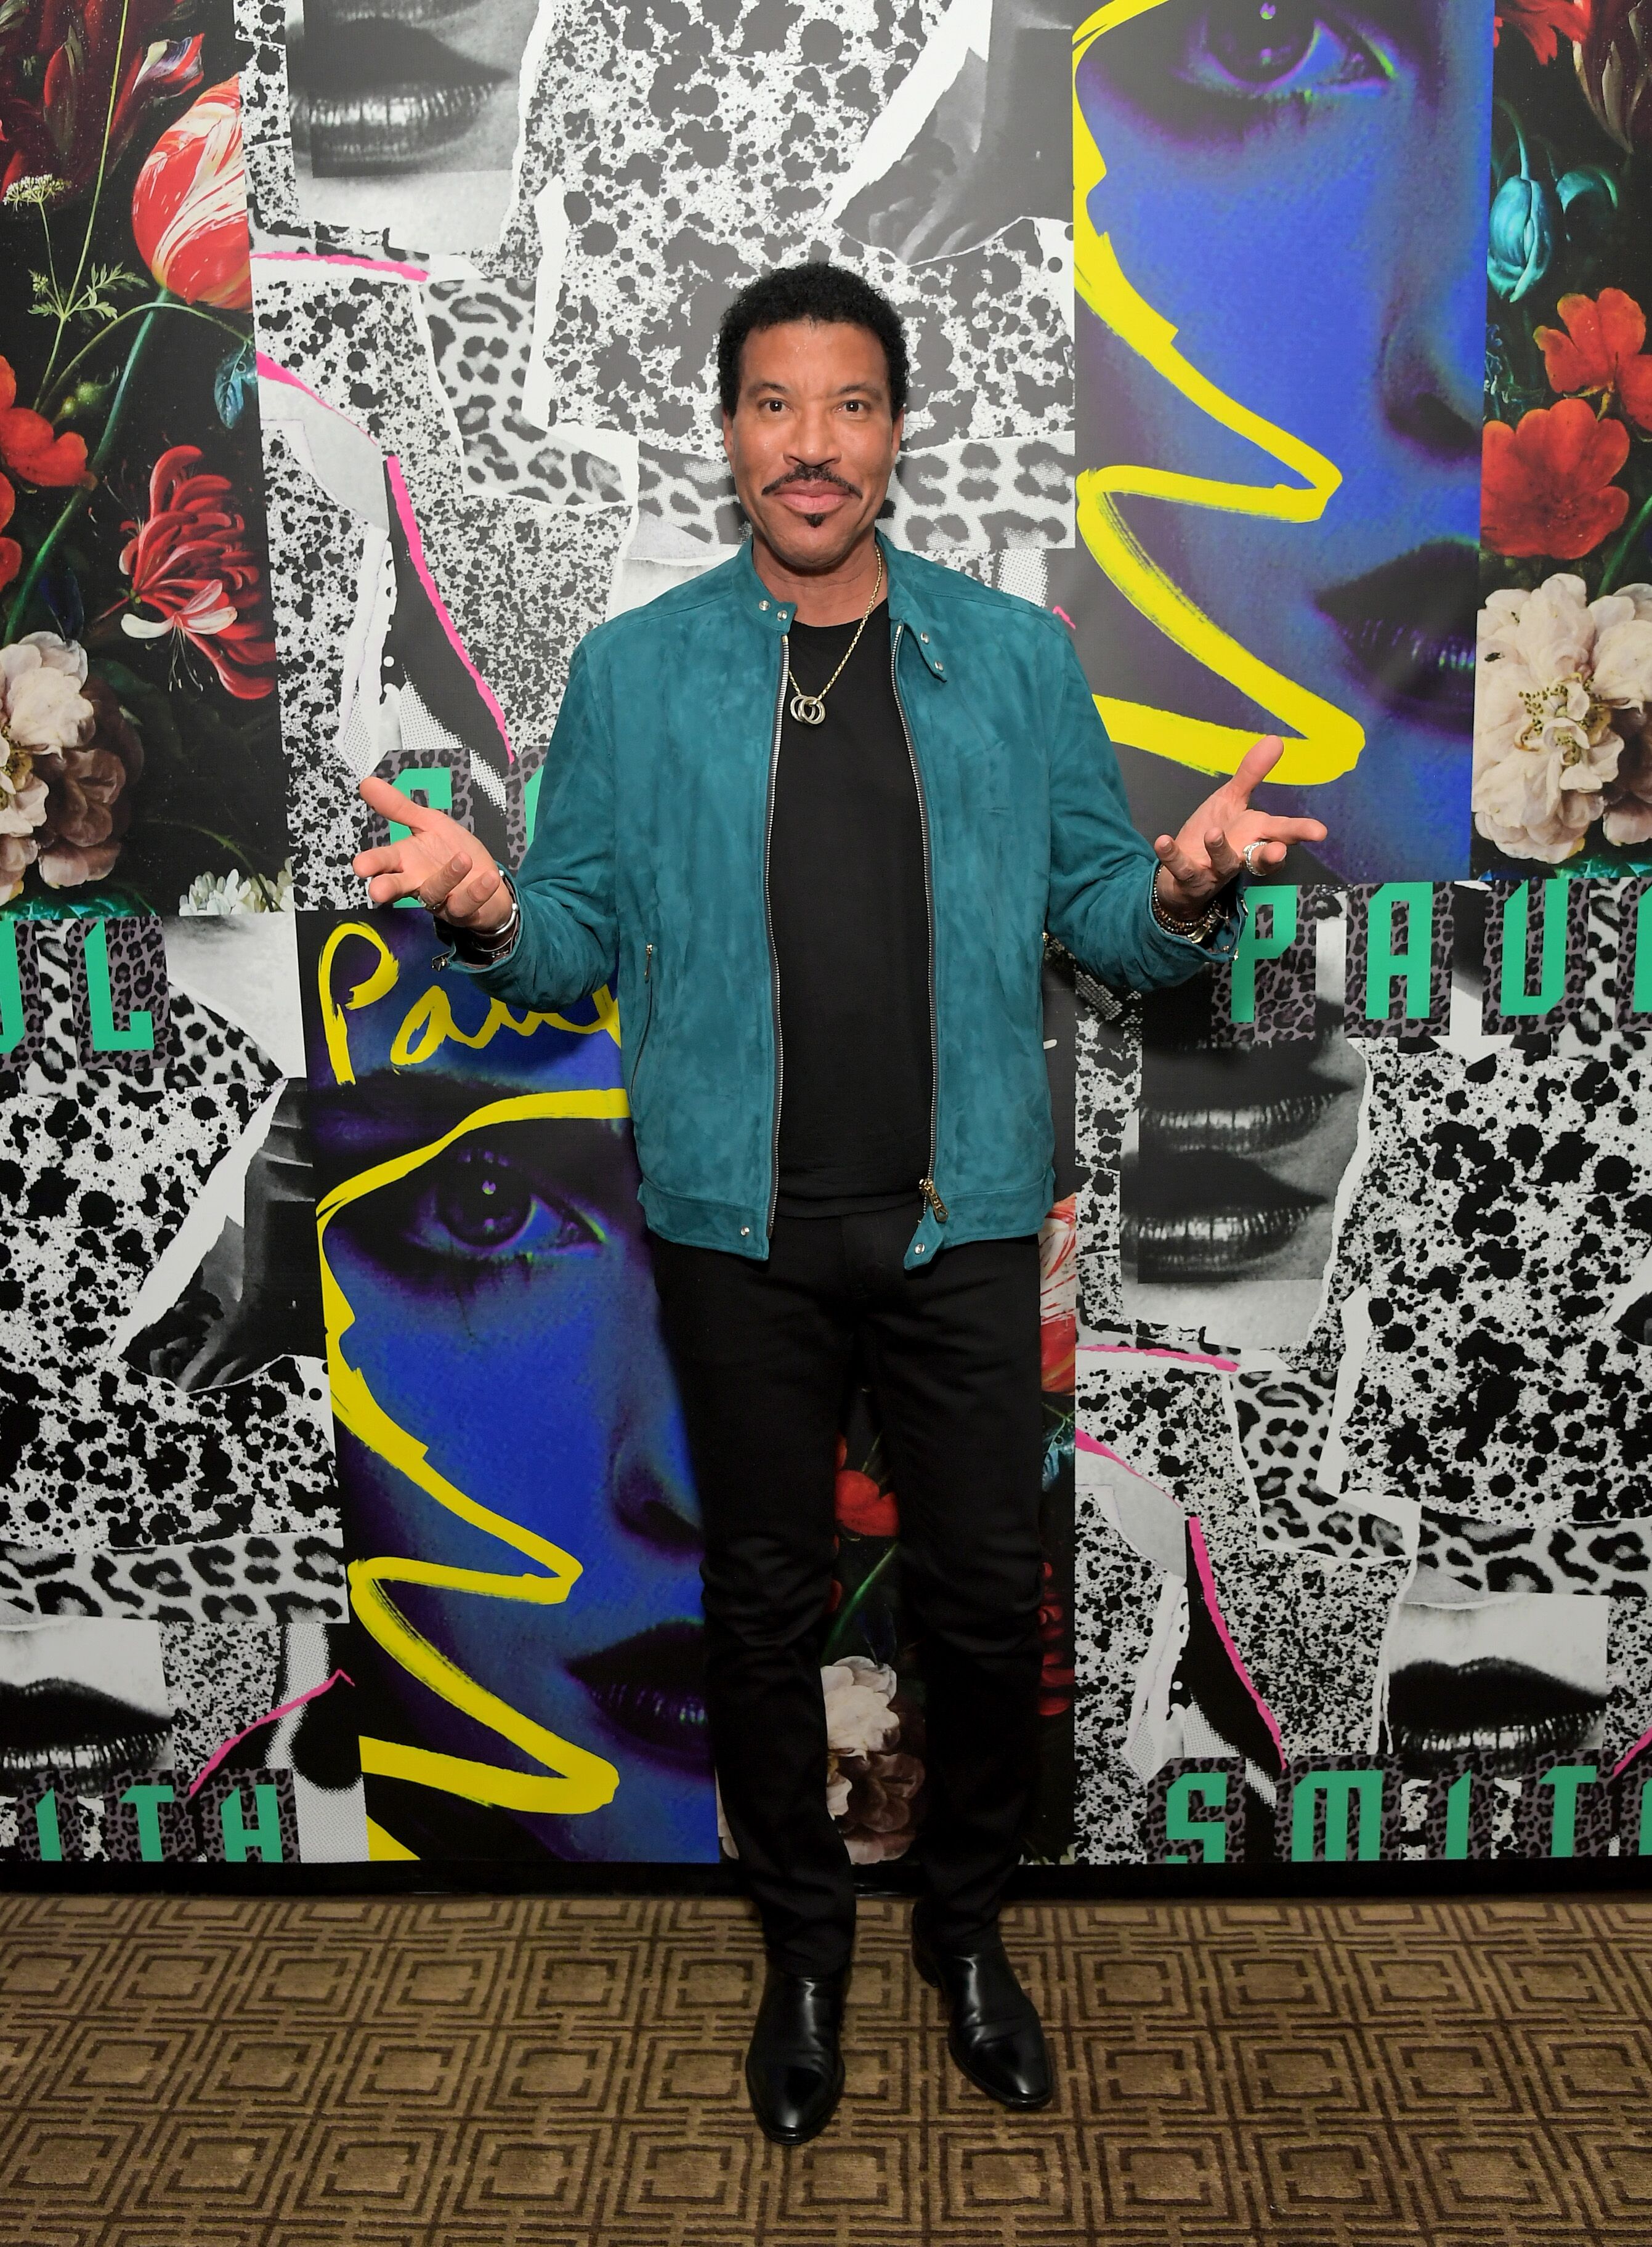 Lionel Richie at the "Paul Smith Honors John Legend" dinner on May 14, 2019, in Los Angeles, California | Photo: Charley Gallay/Getty Images